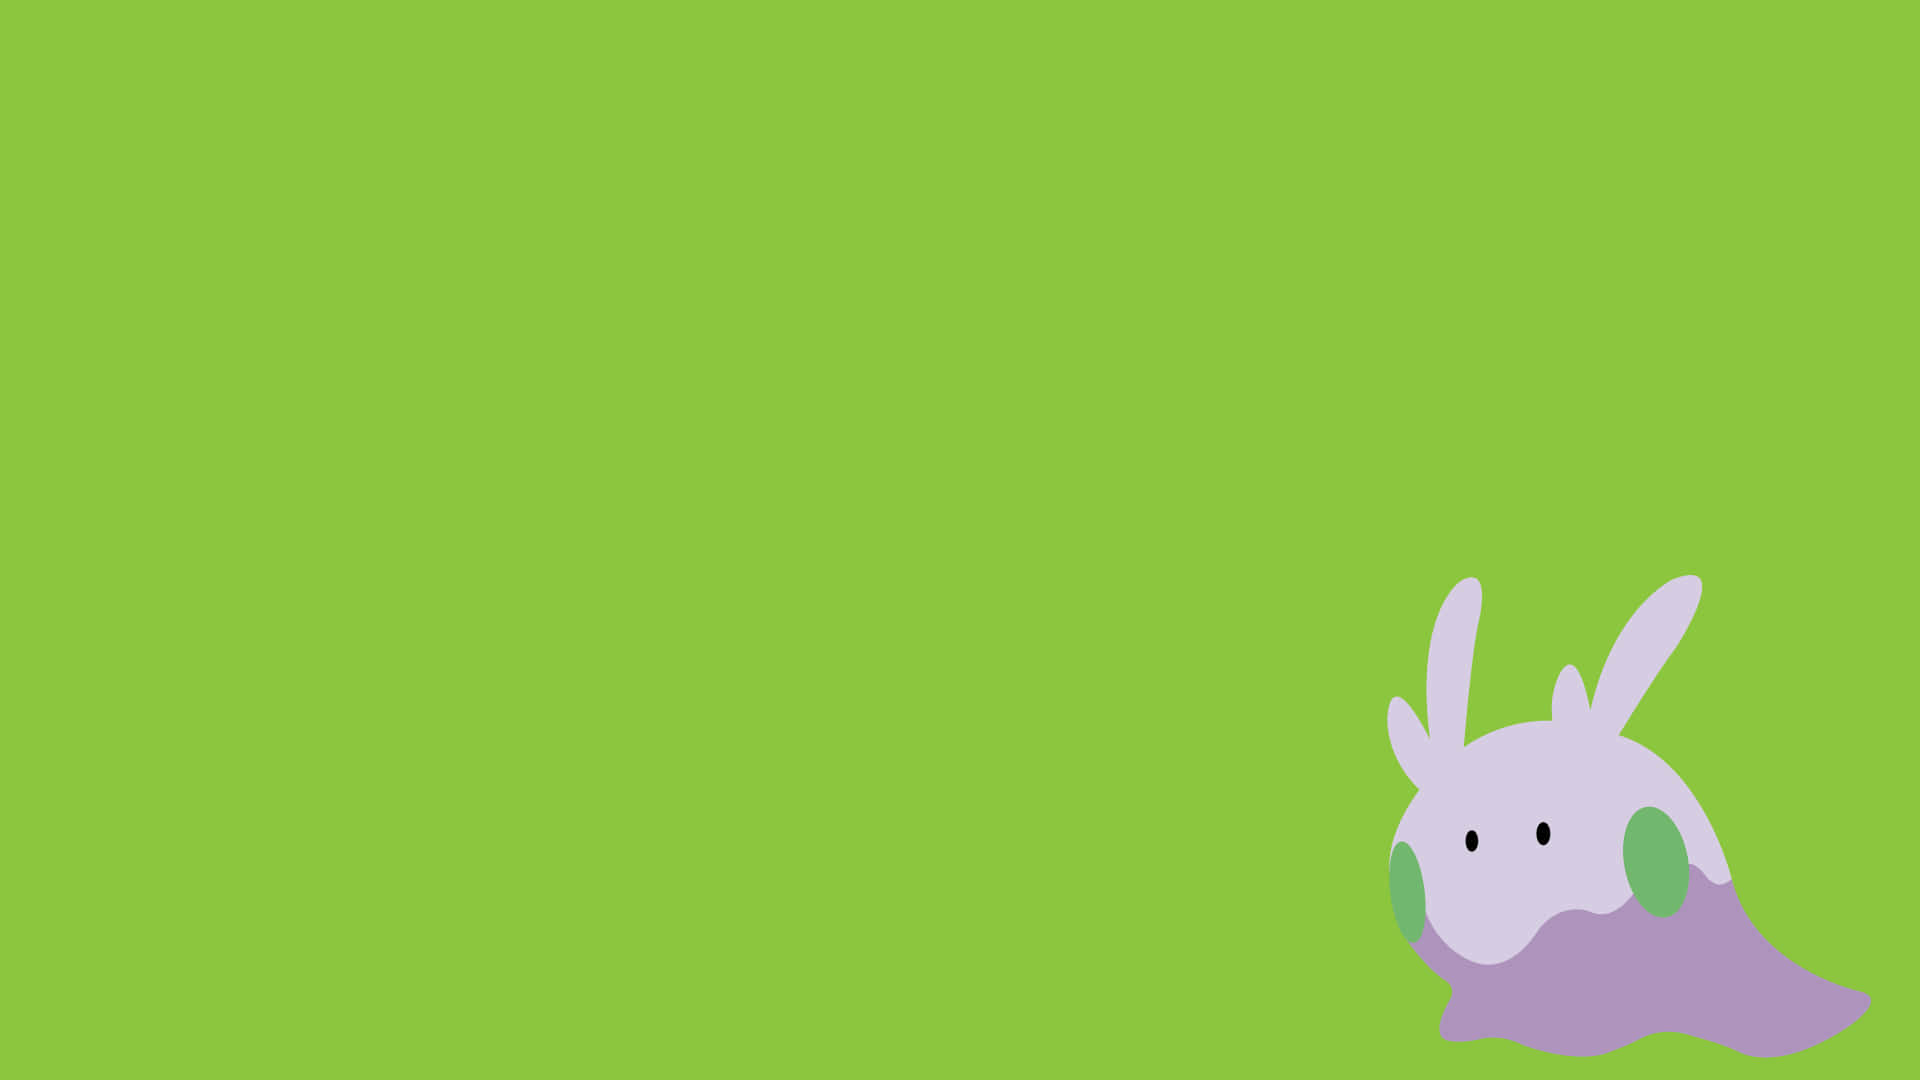 Adorable Goomy pictured against a bright green background Wallpaper